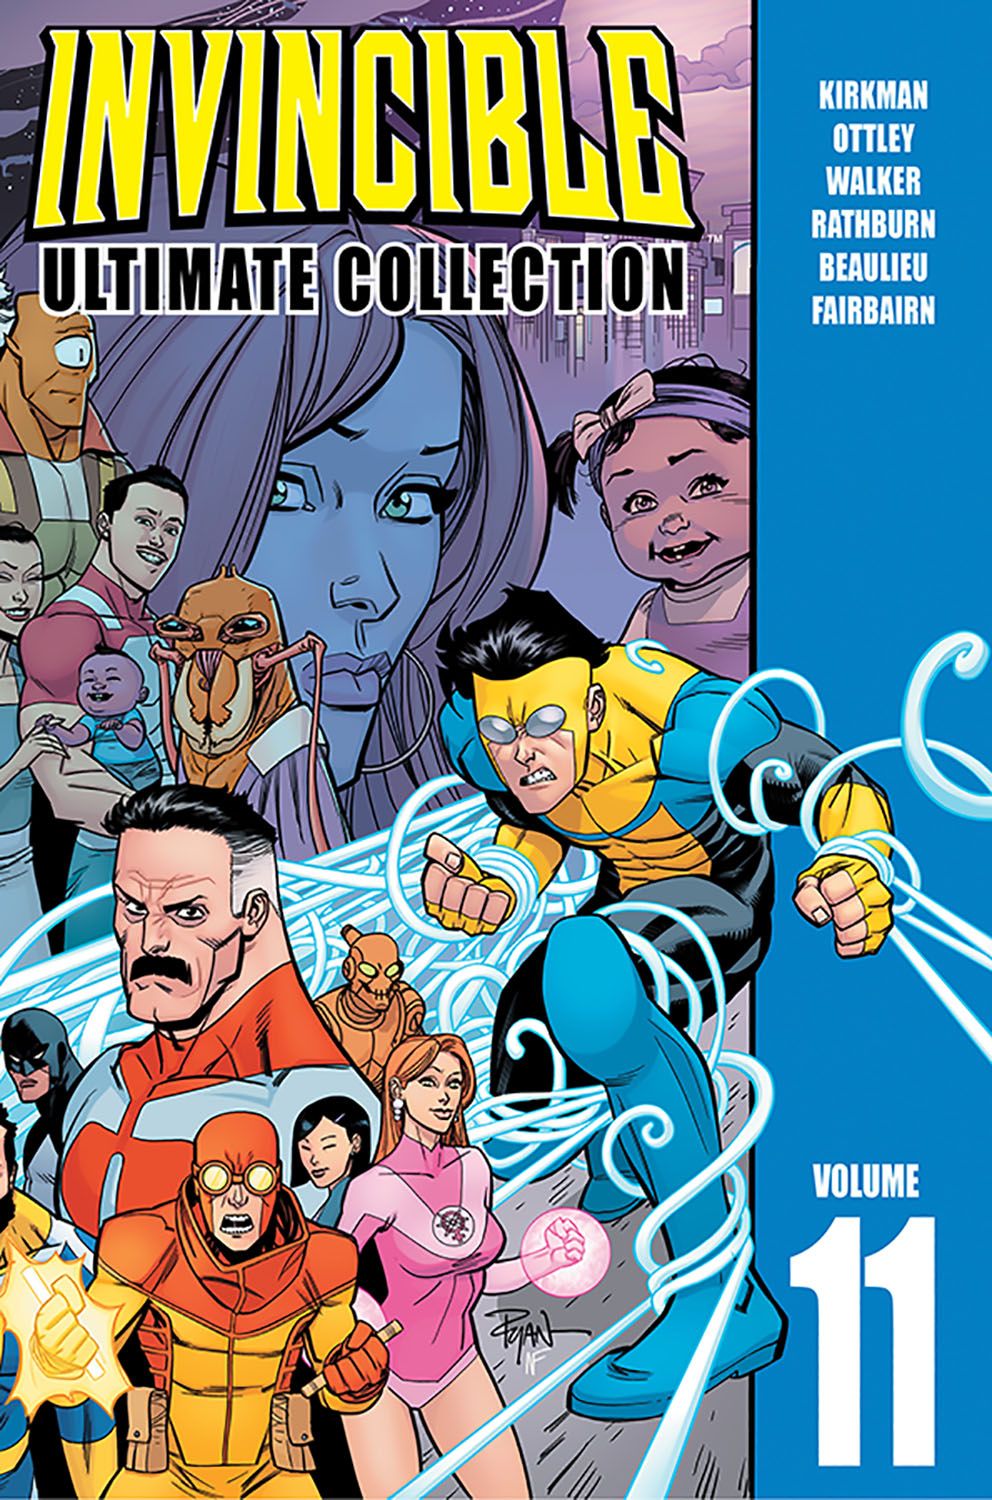 Invincible HC VOL 11 Ultimate Collection